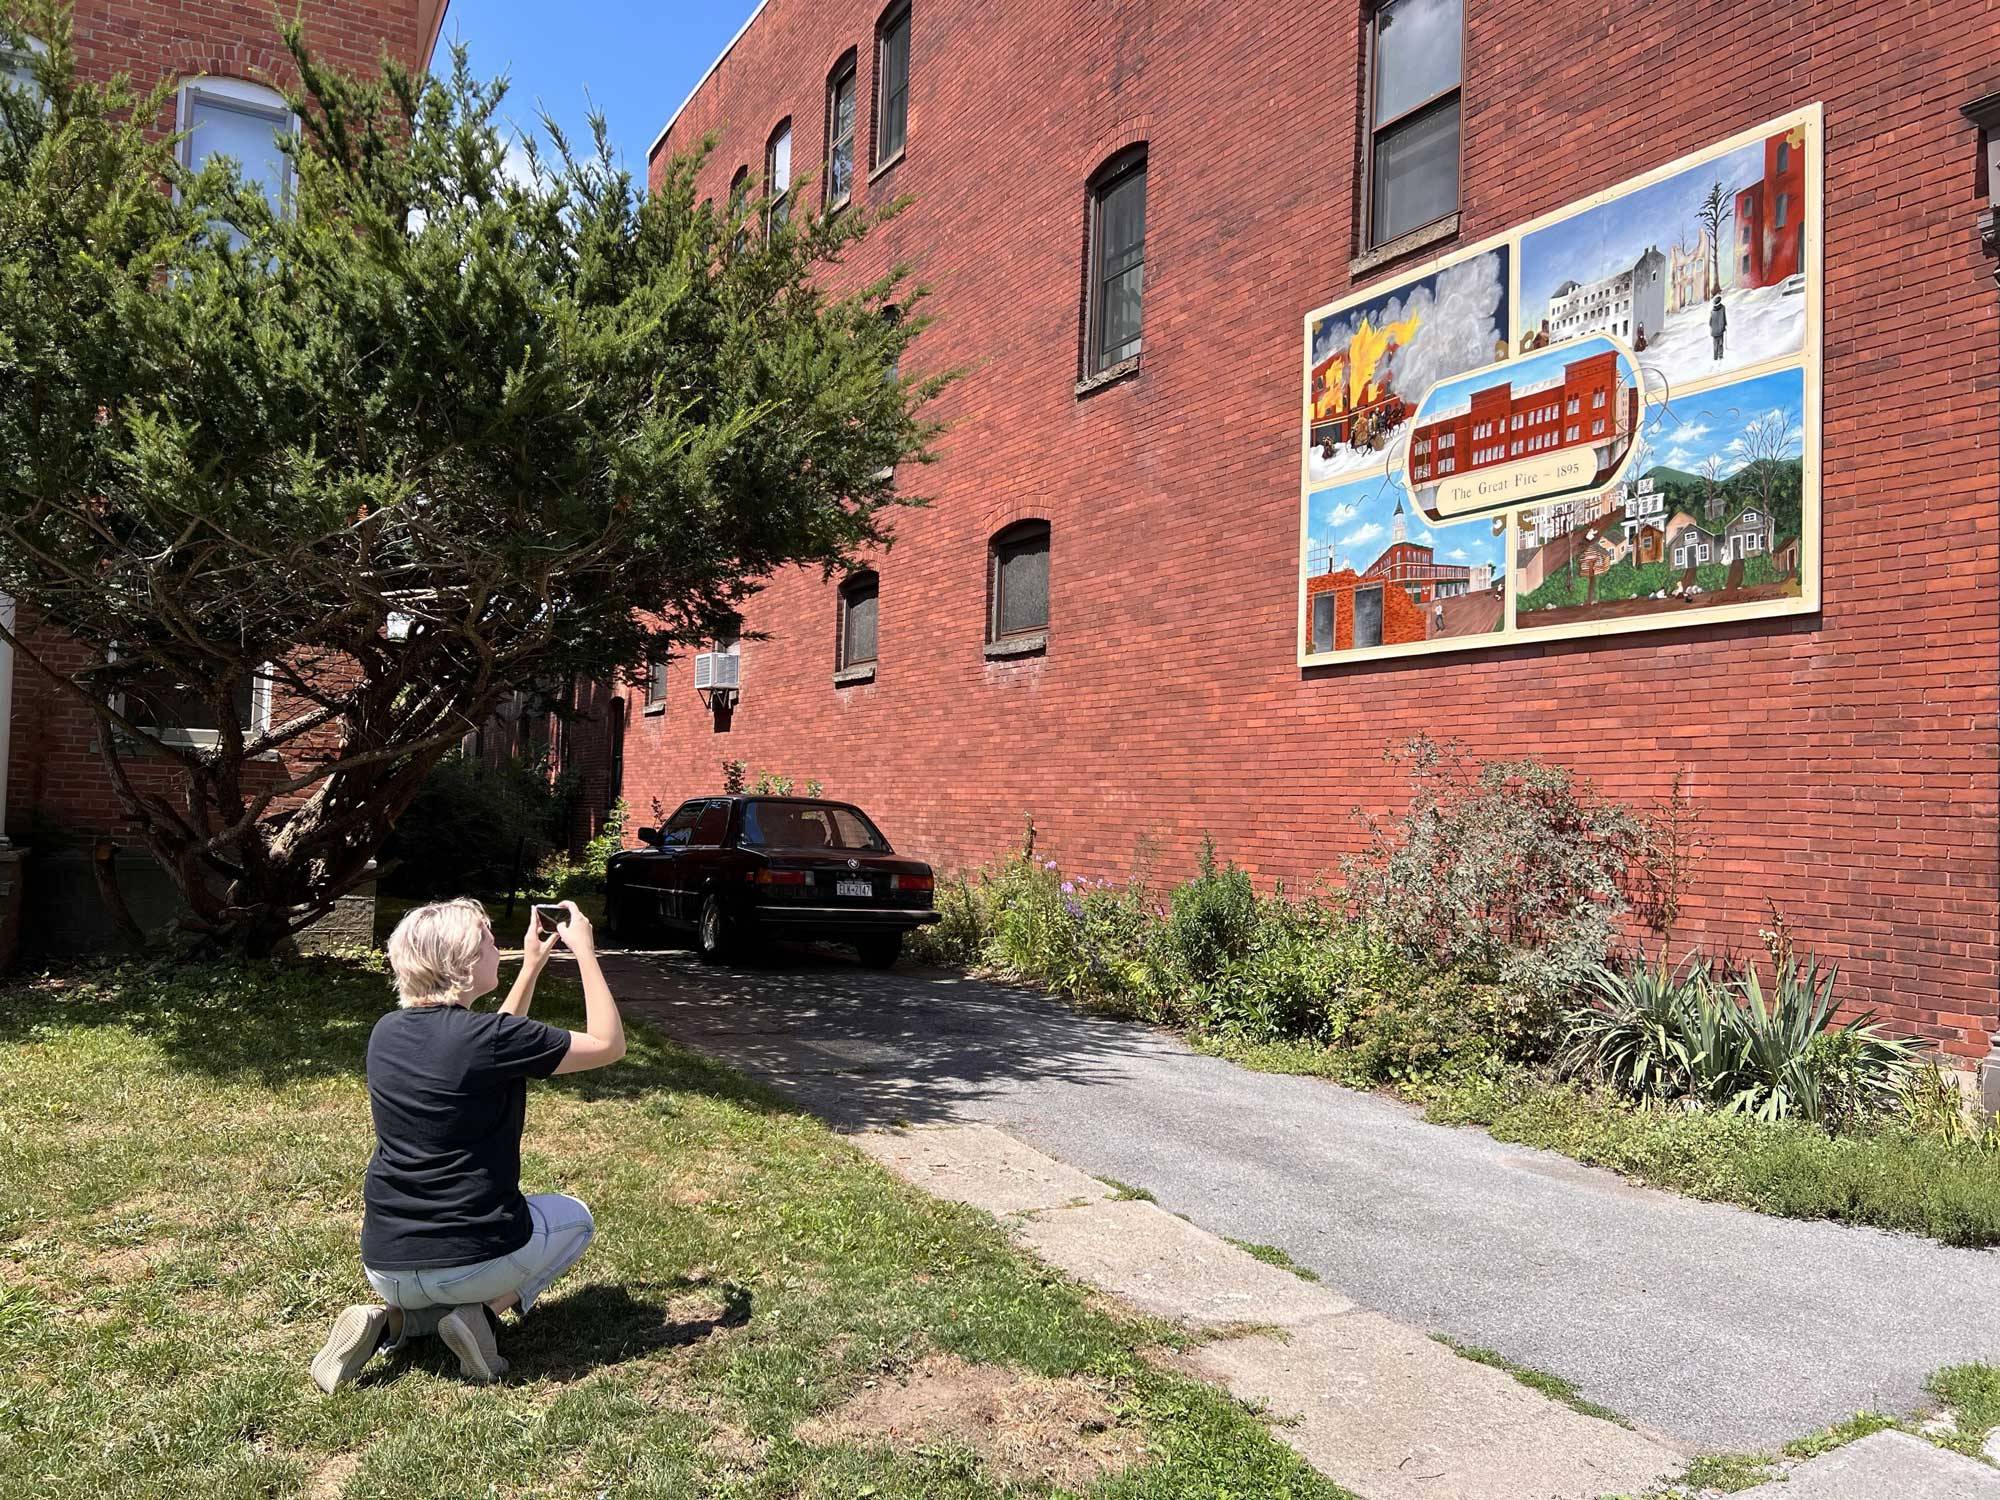 Rebecca Sweigart is kneeling in front of a mural that depicts the history of the Chenango Canal to video the image for her documentary.